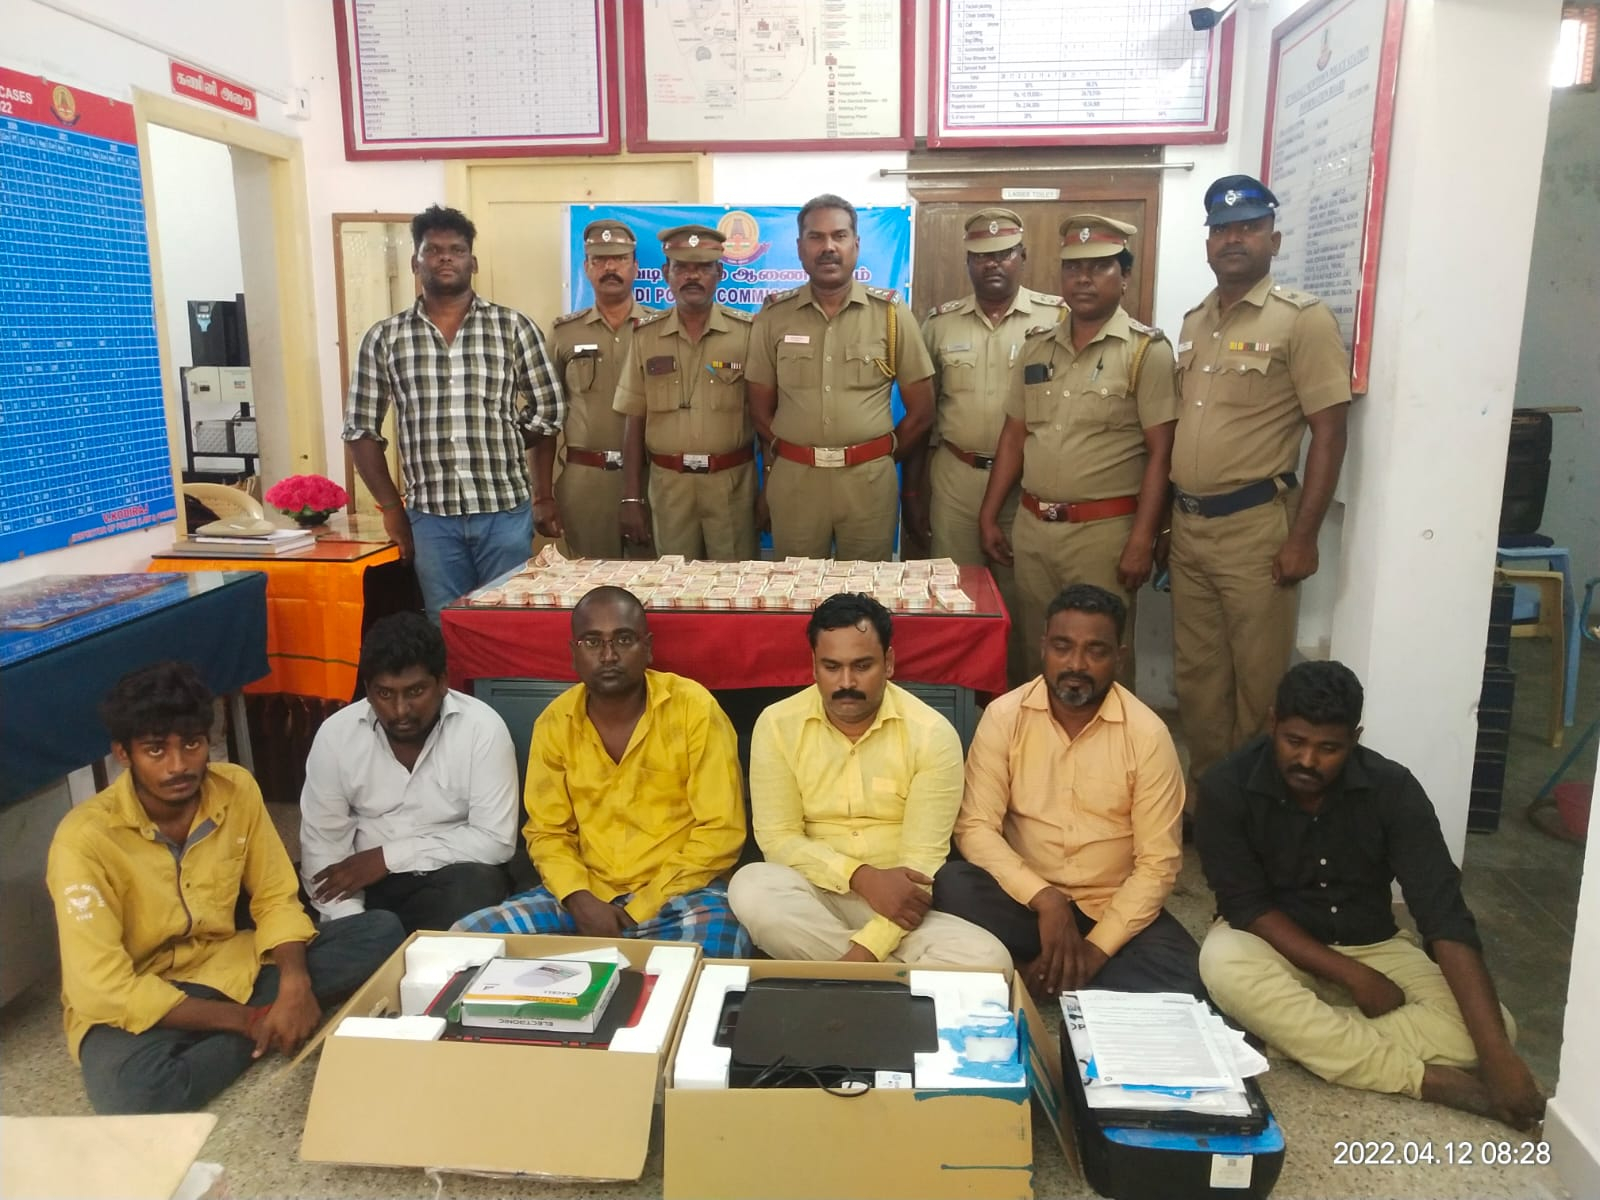 Chennai Police arrest 6 member gang in Counterfeit Currency Case